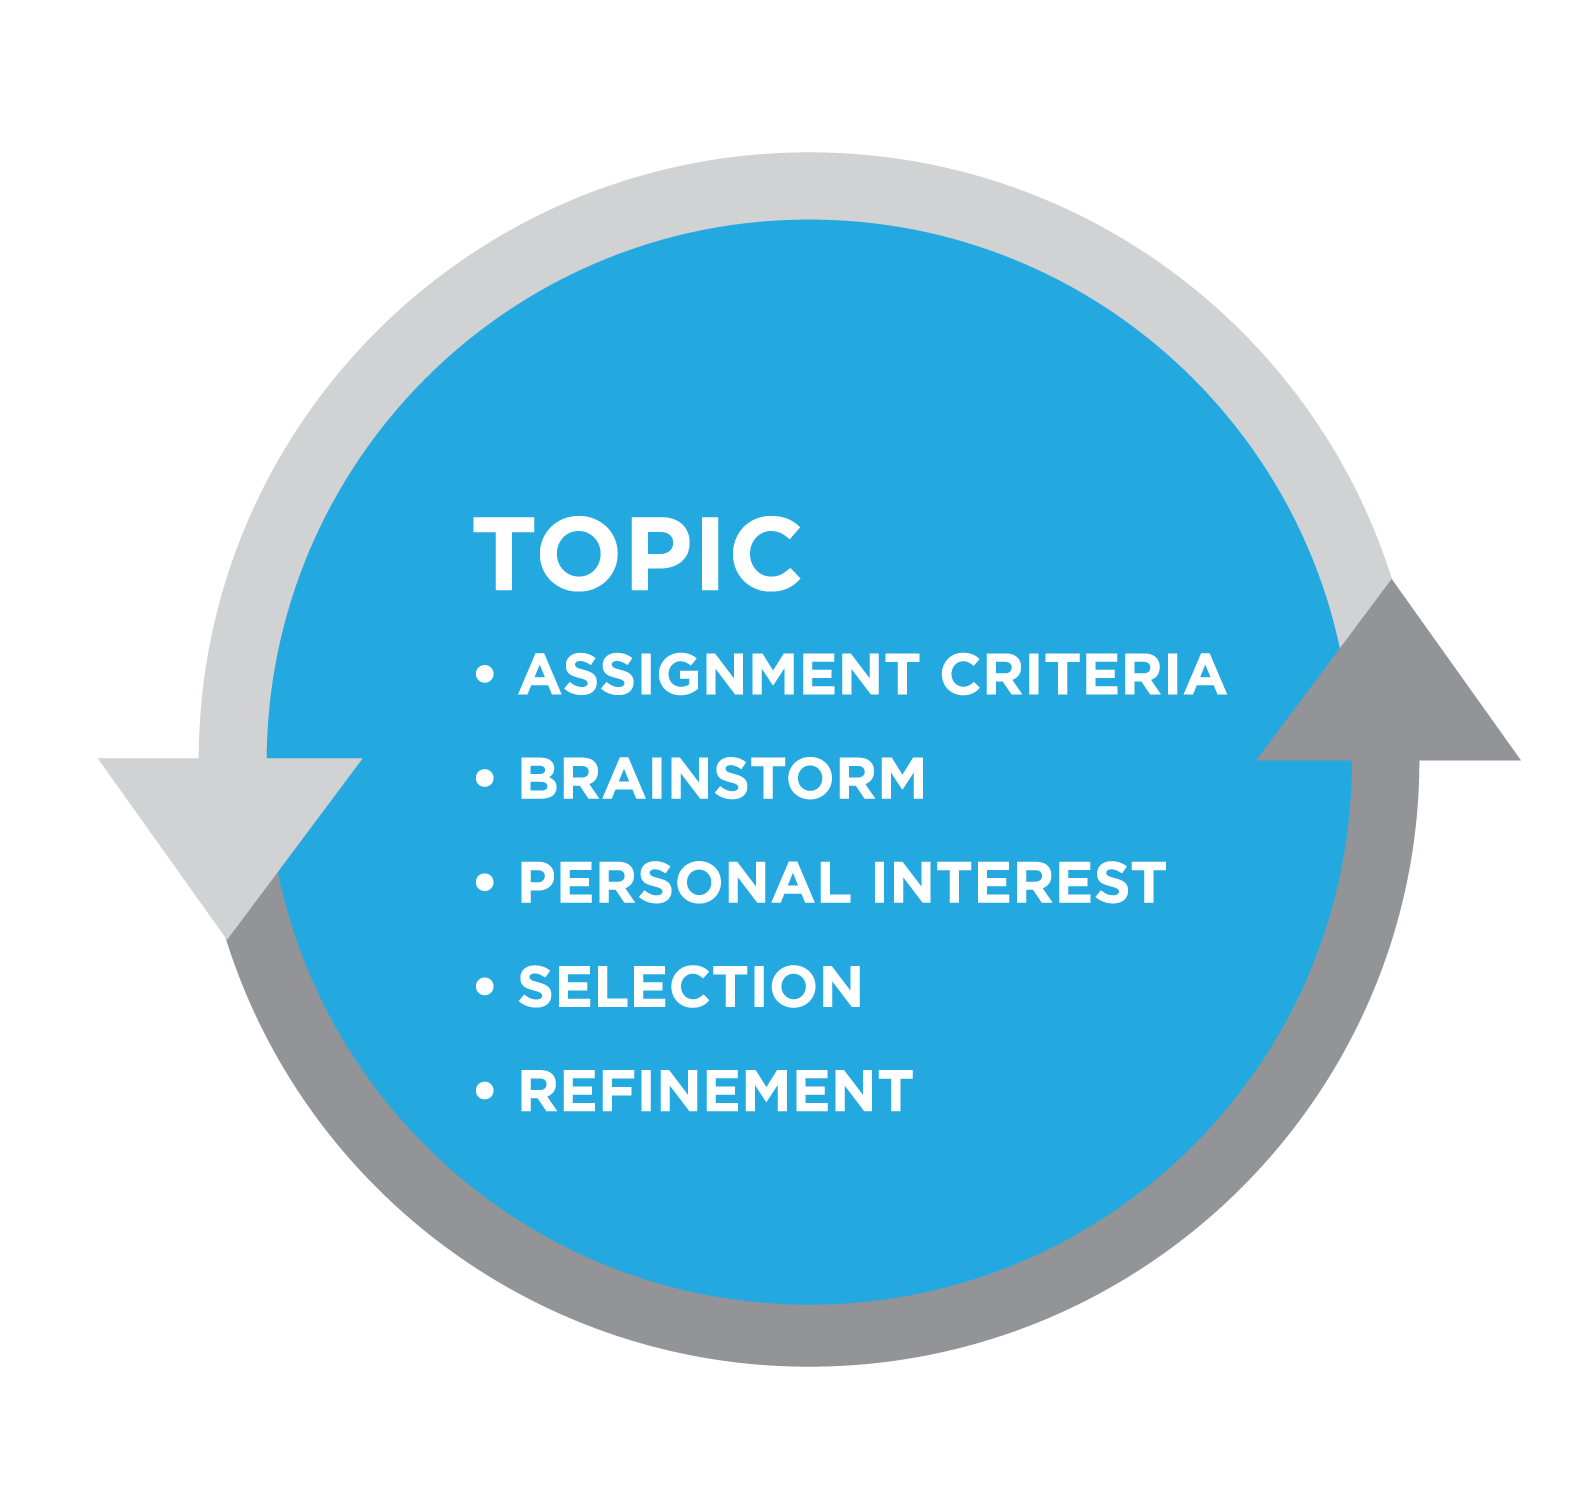 Graphic titled Topic. Bullet list: Assignment criteria, brainstorm, personal interest, selection, refinement. All text in a blue circle bordered by gray arrows.